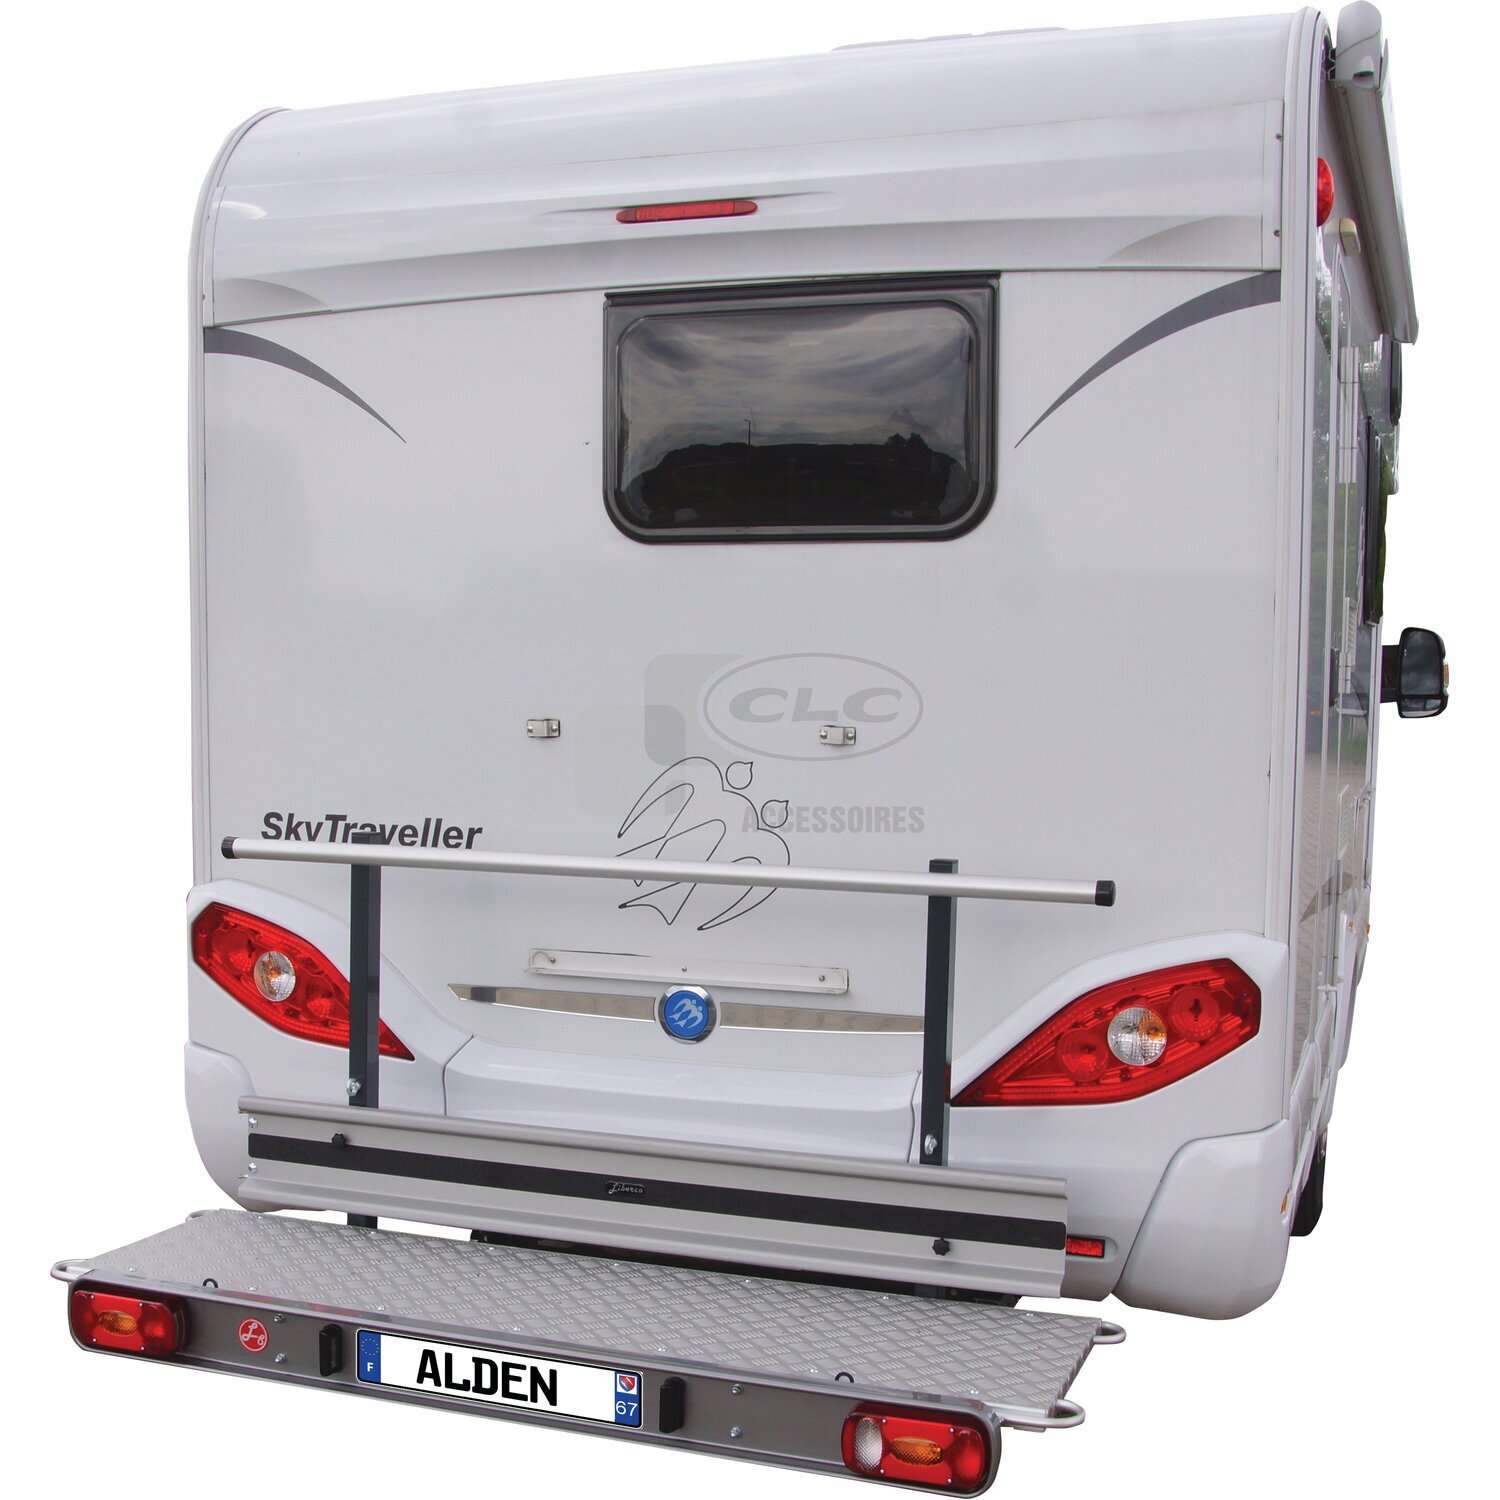 Equipement camping car - Vente accessoires camping car - Achat